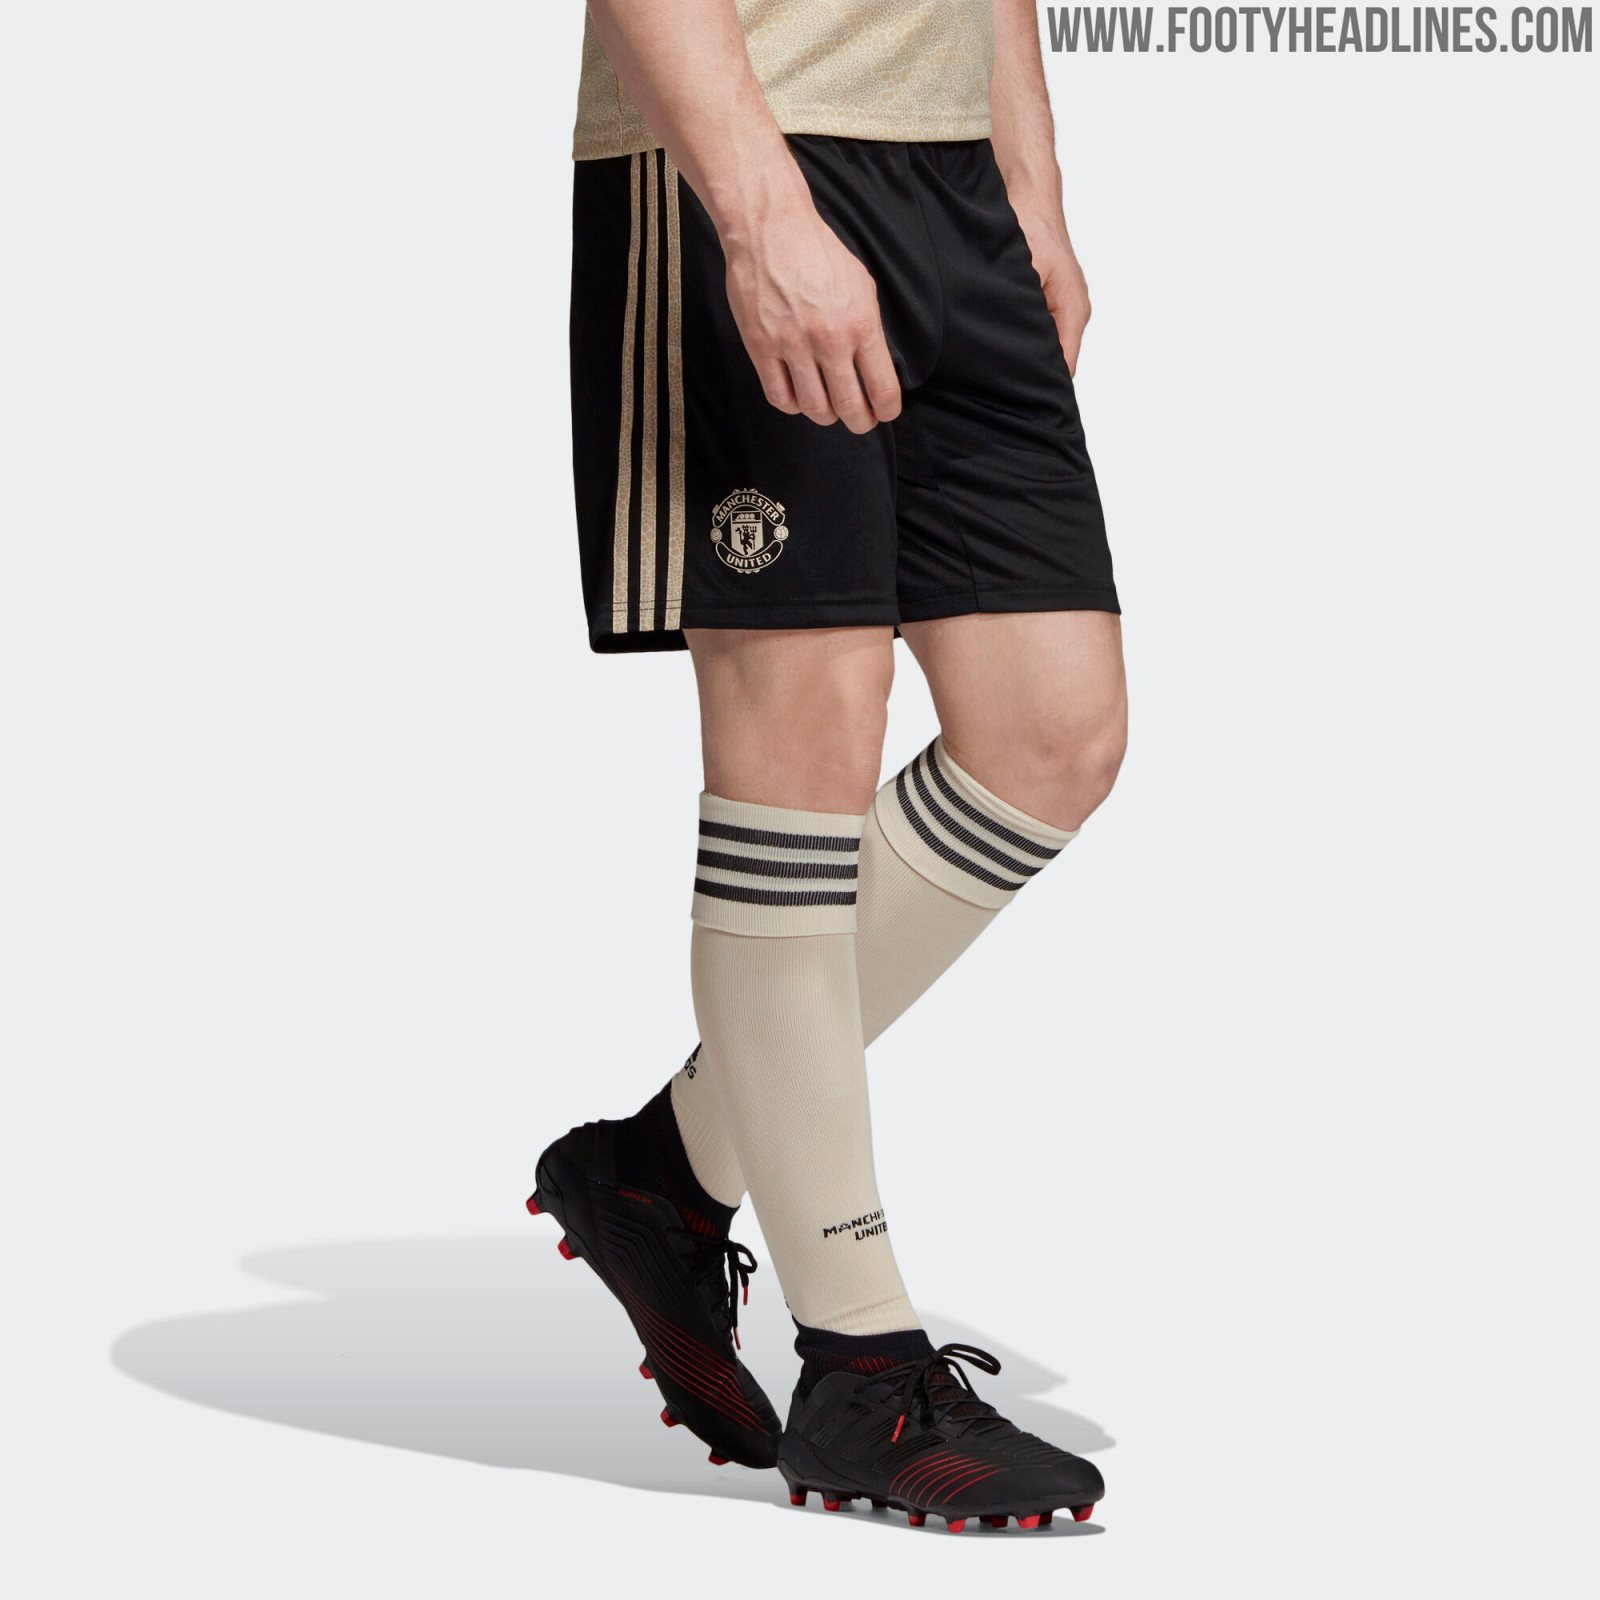 Manchester United 19-20 Away Kit Released - Footy Headlines